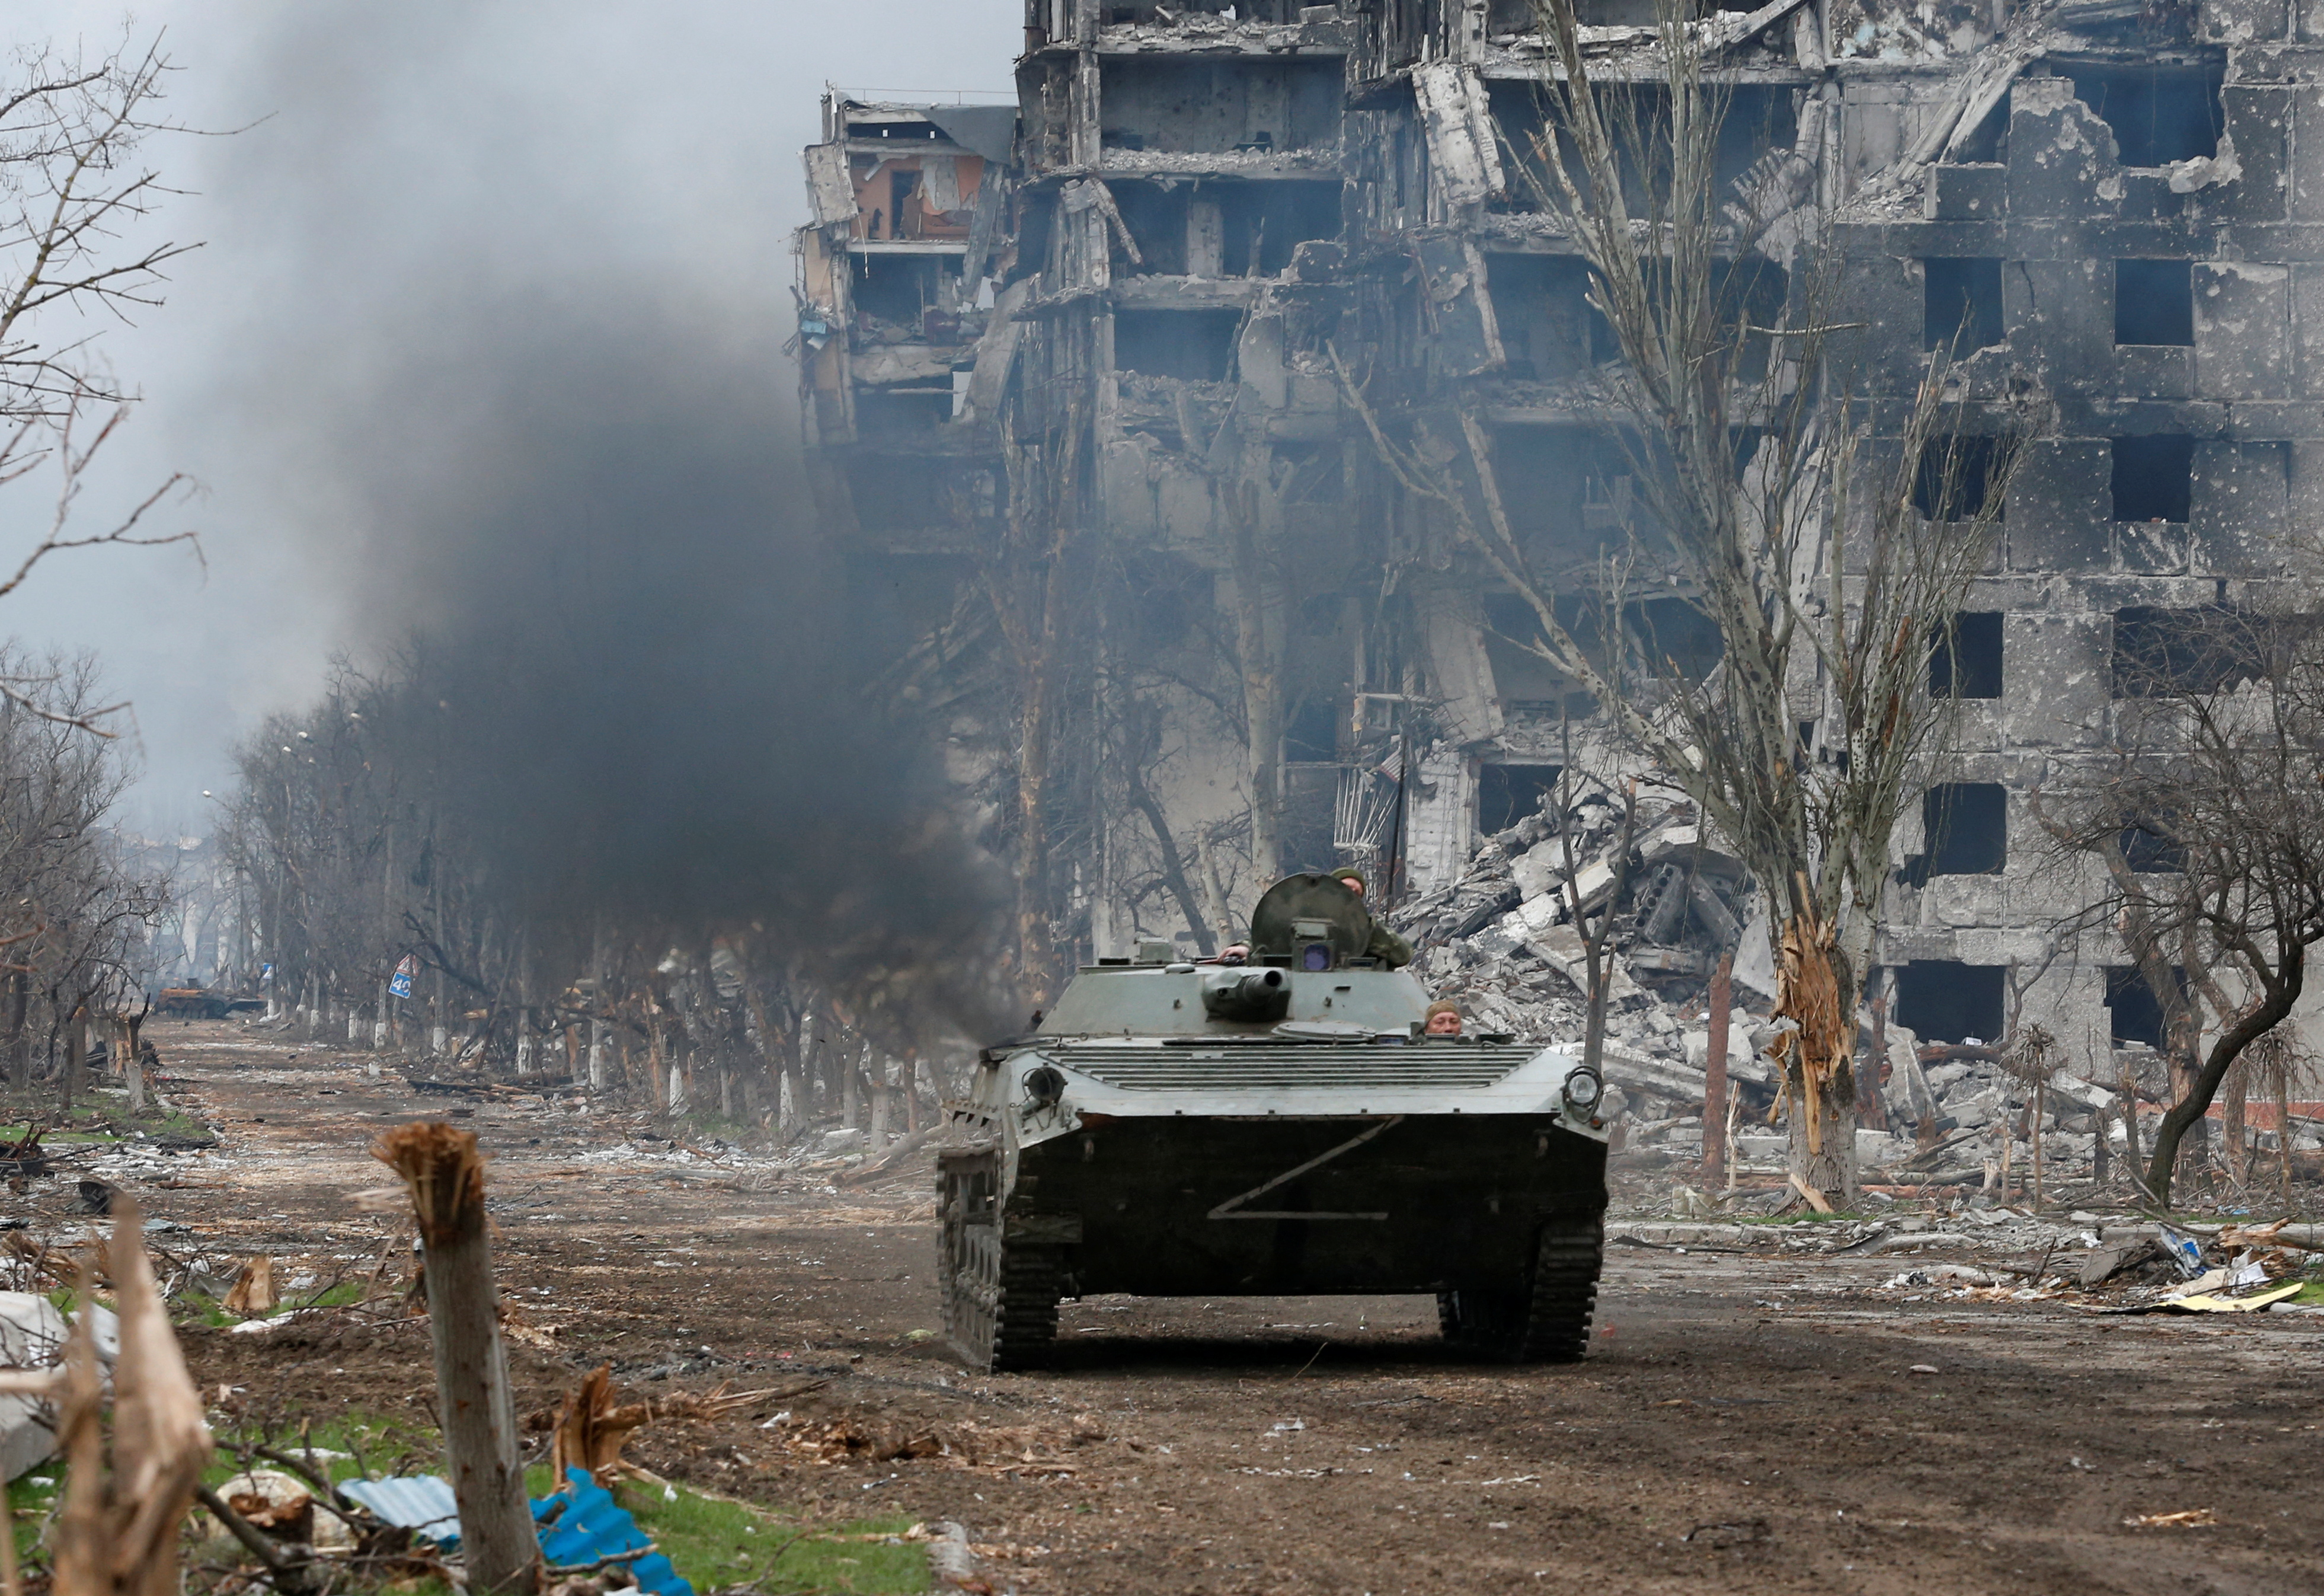 Service members of pro-Russian troops ride an armoured vehicle during fighting near Azovstal plant in Mariupol